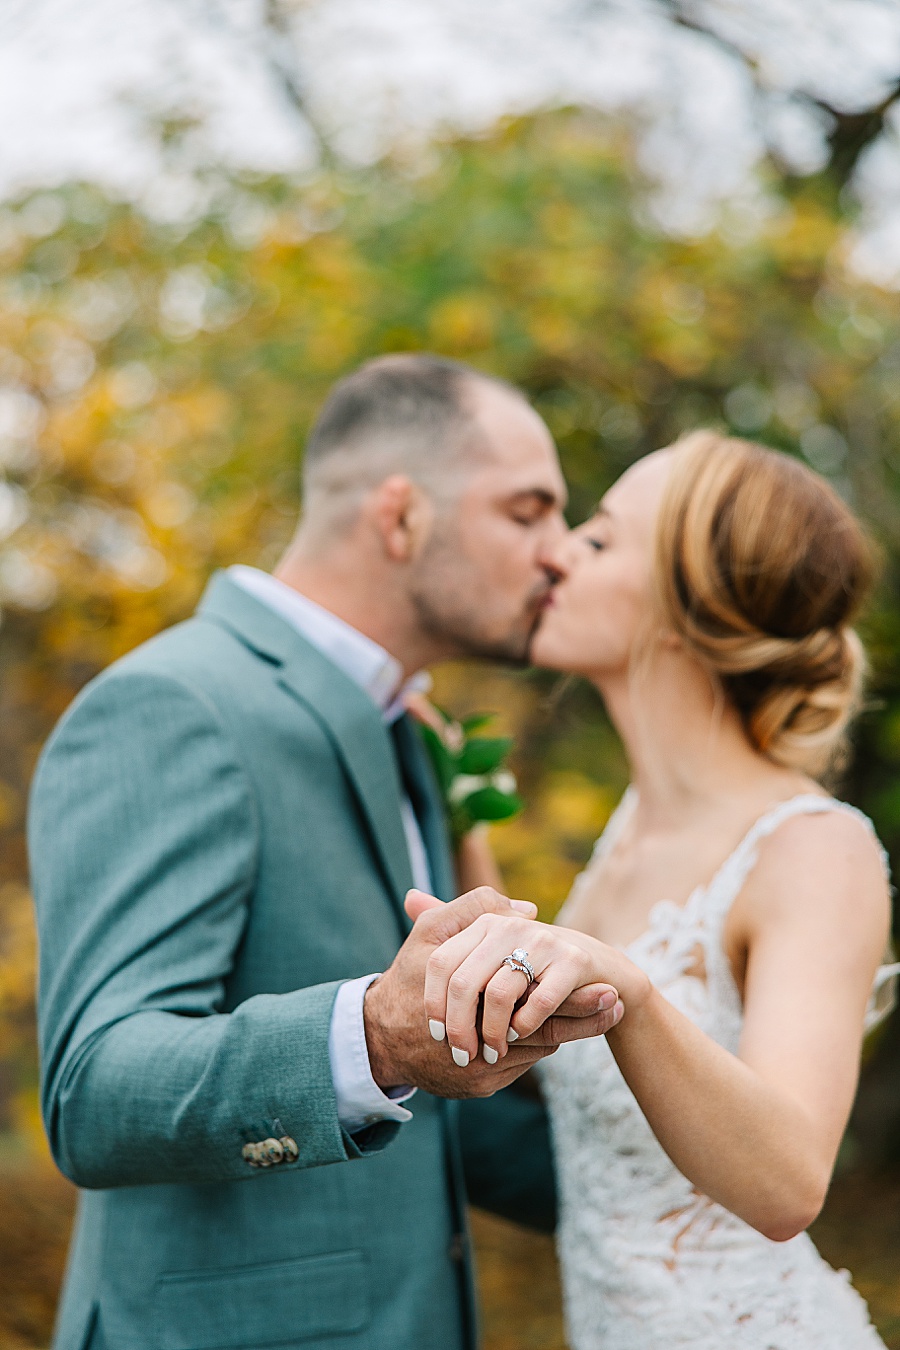 Bride & Groom kissing at park wedding in Knoxville TN by Mandy Hart Photo, Knoxville TN Wedding Photographer